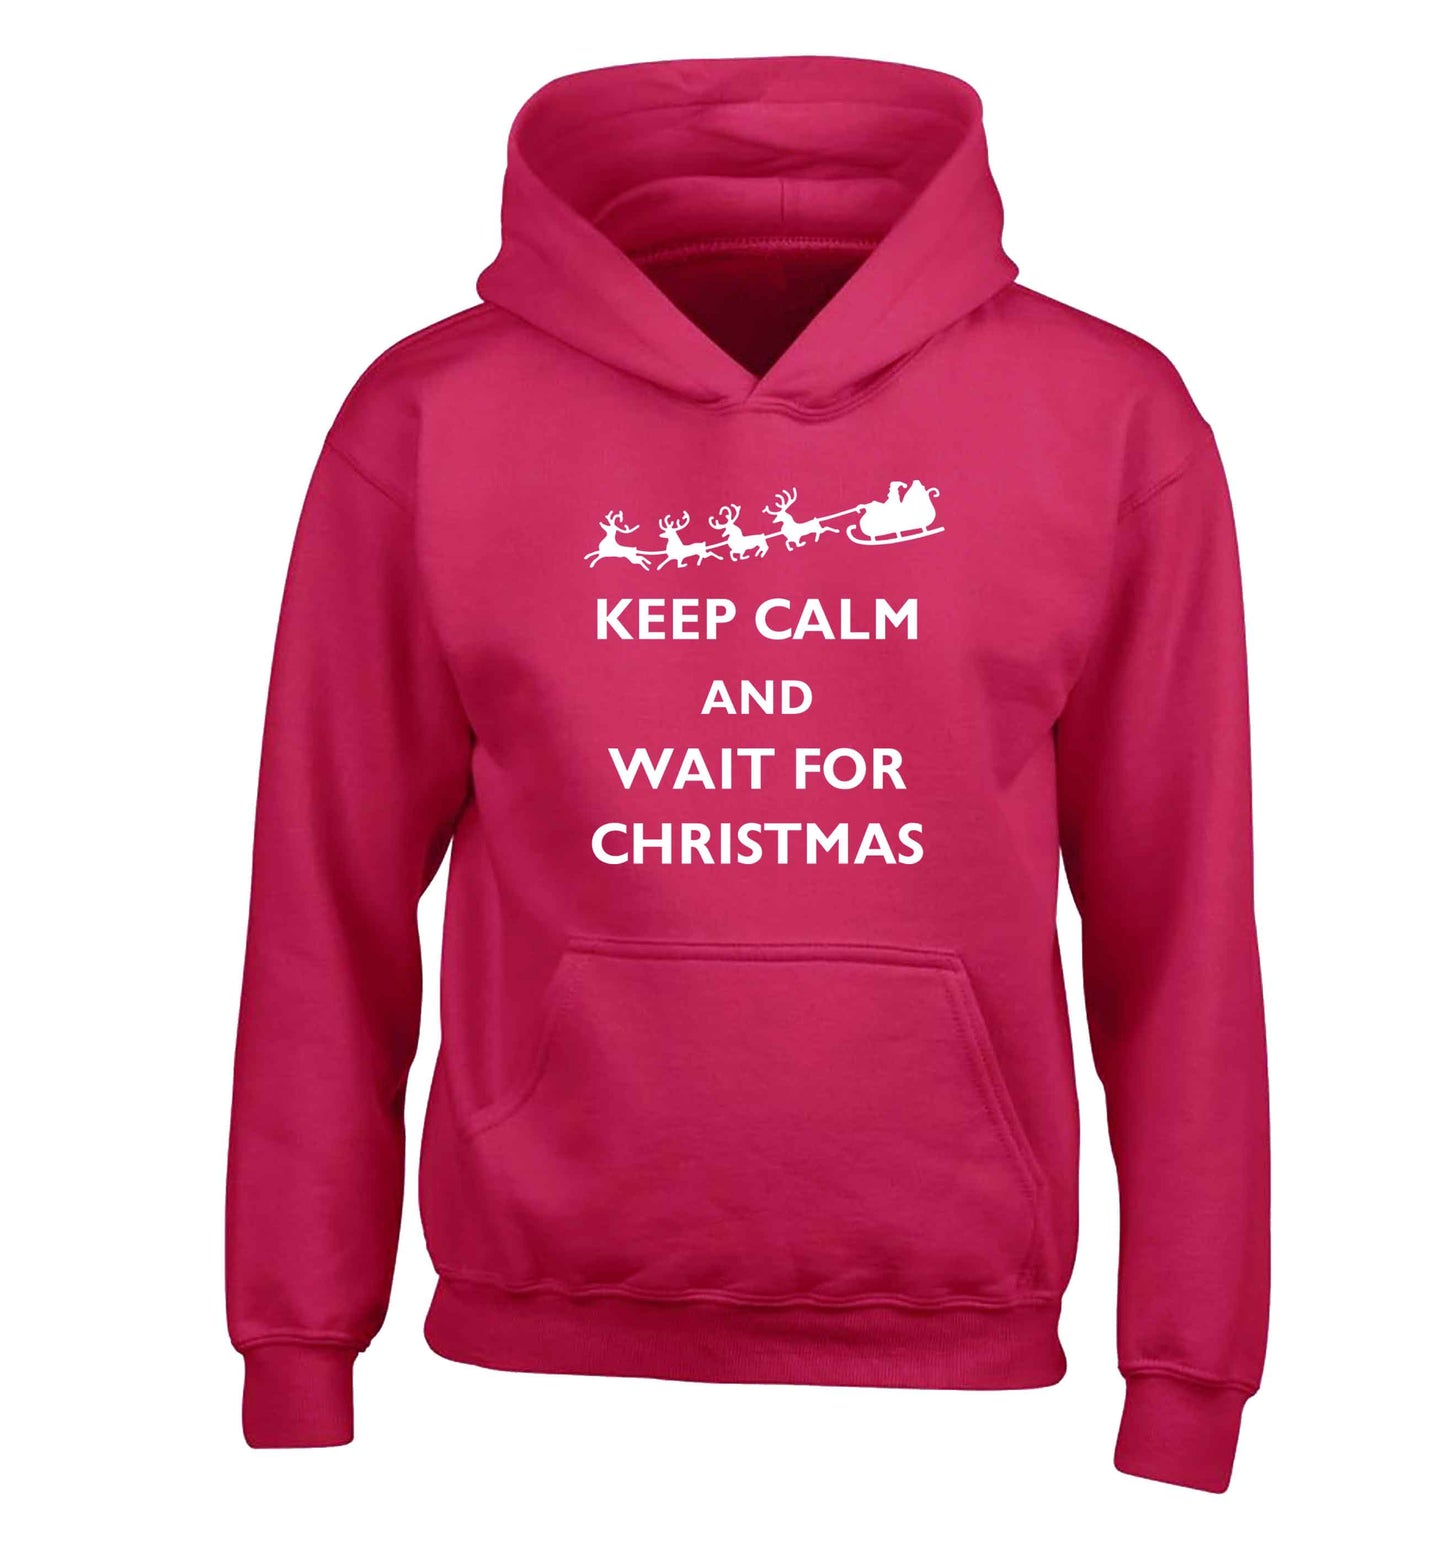 Keep calm and wait for Christmas children's pink hoodie 12-13 Years